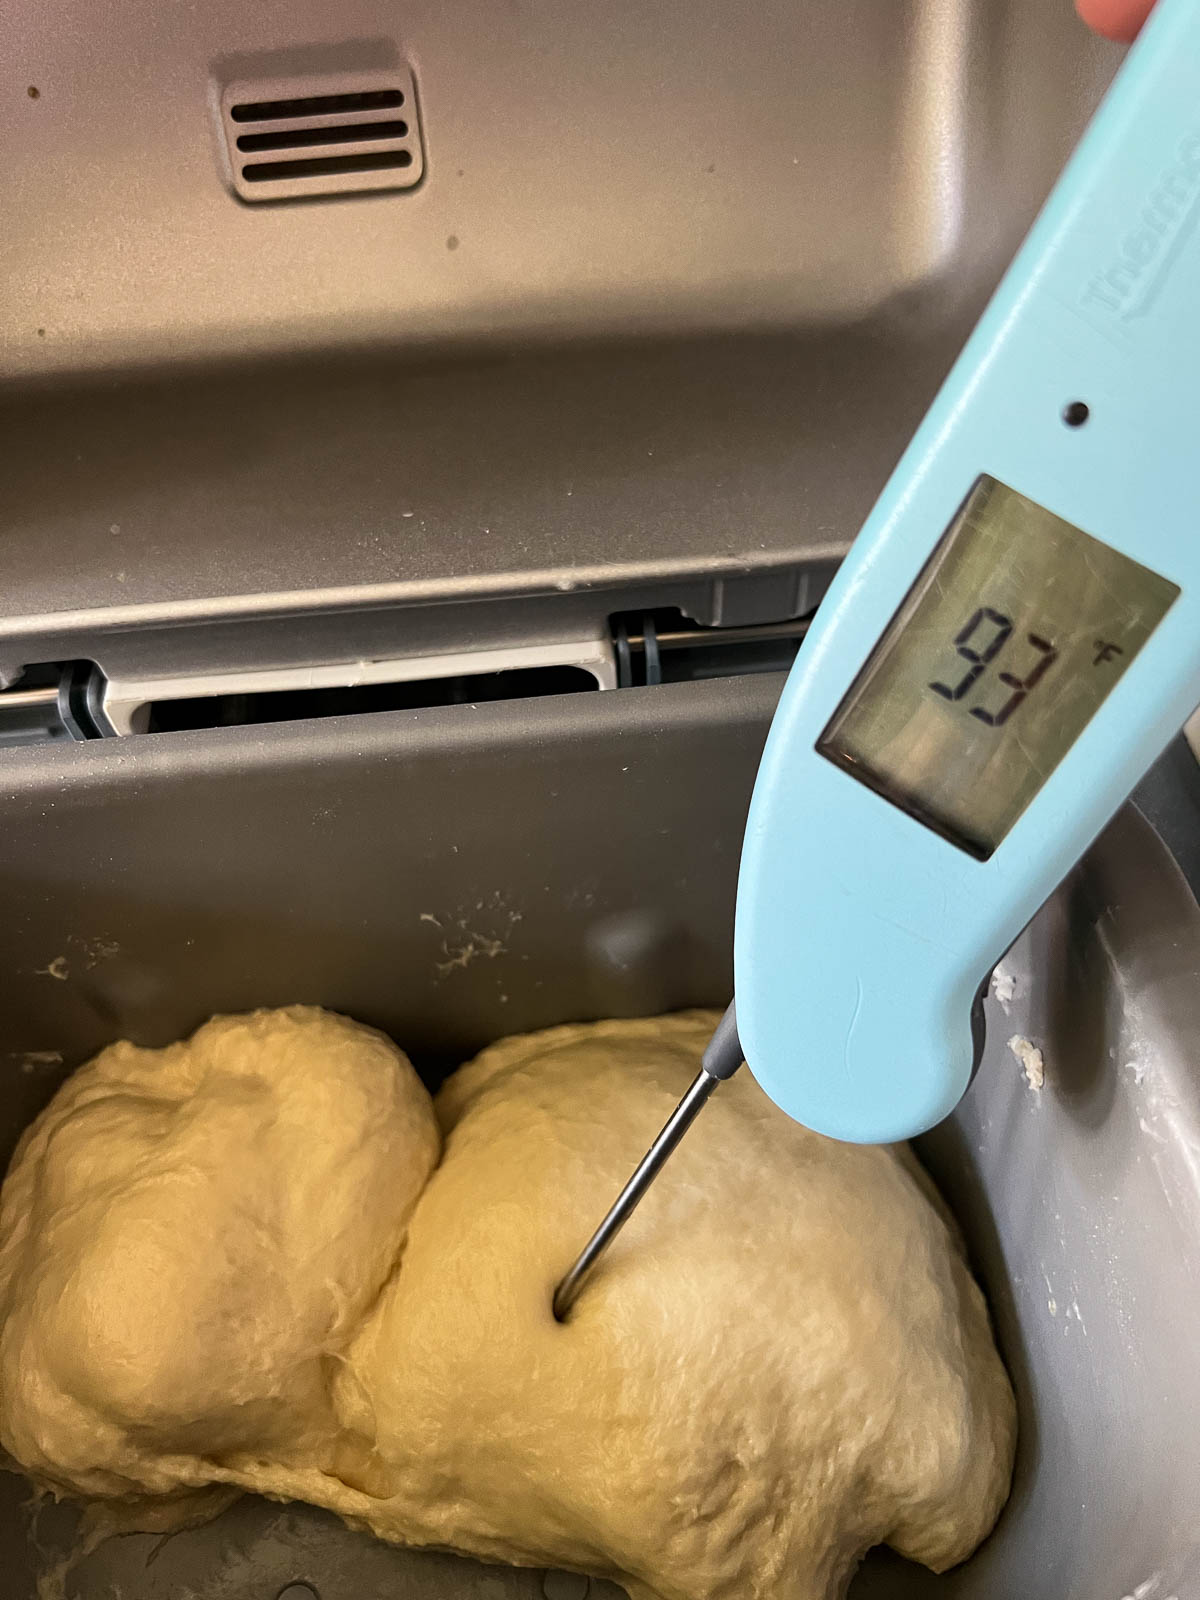 checking the temp of dough after kneading in bread maker